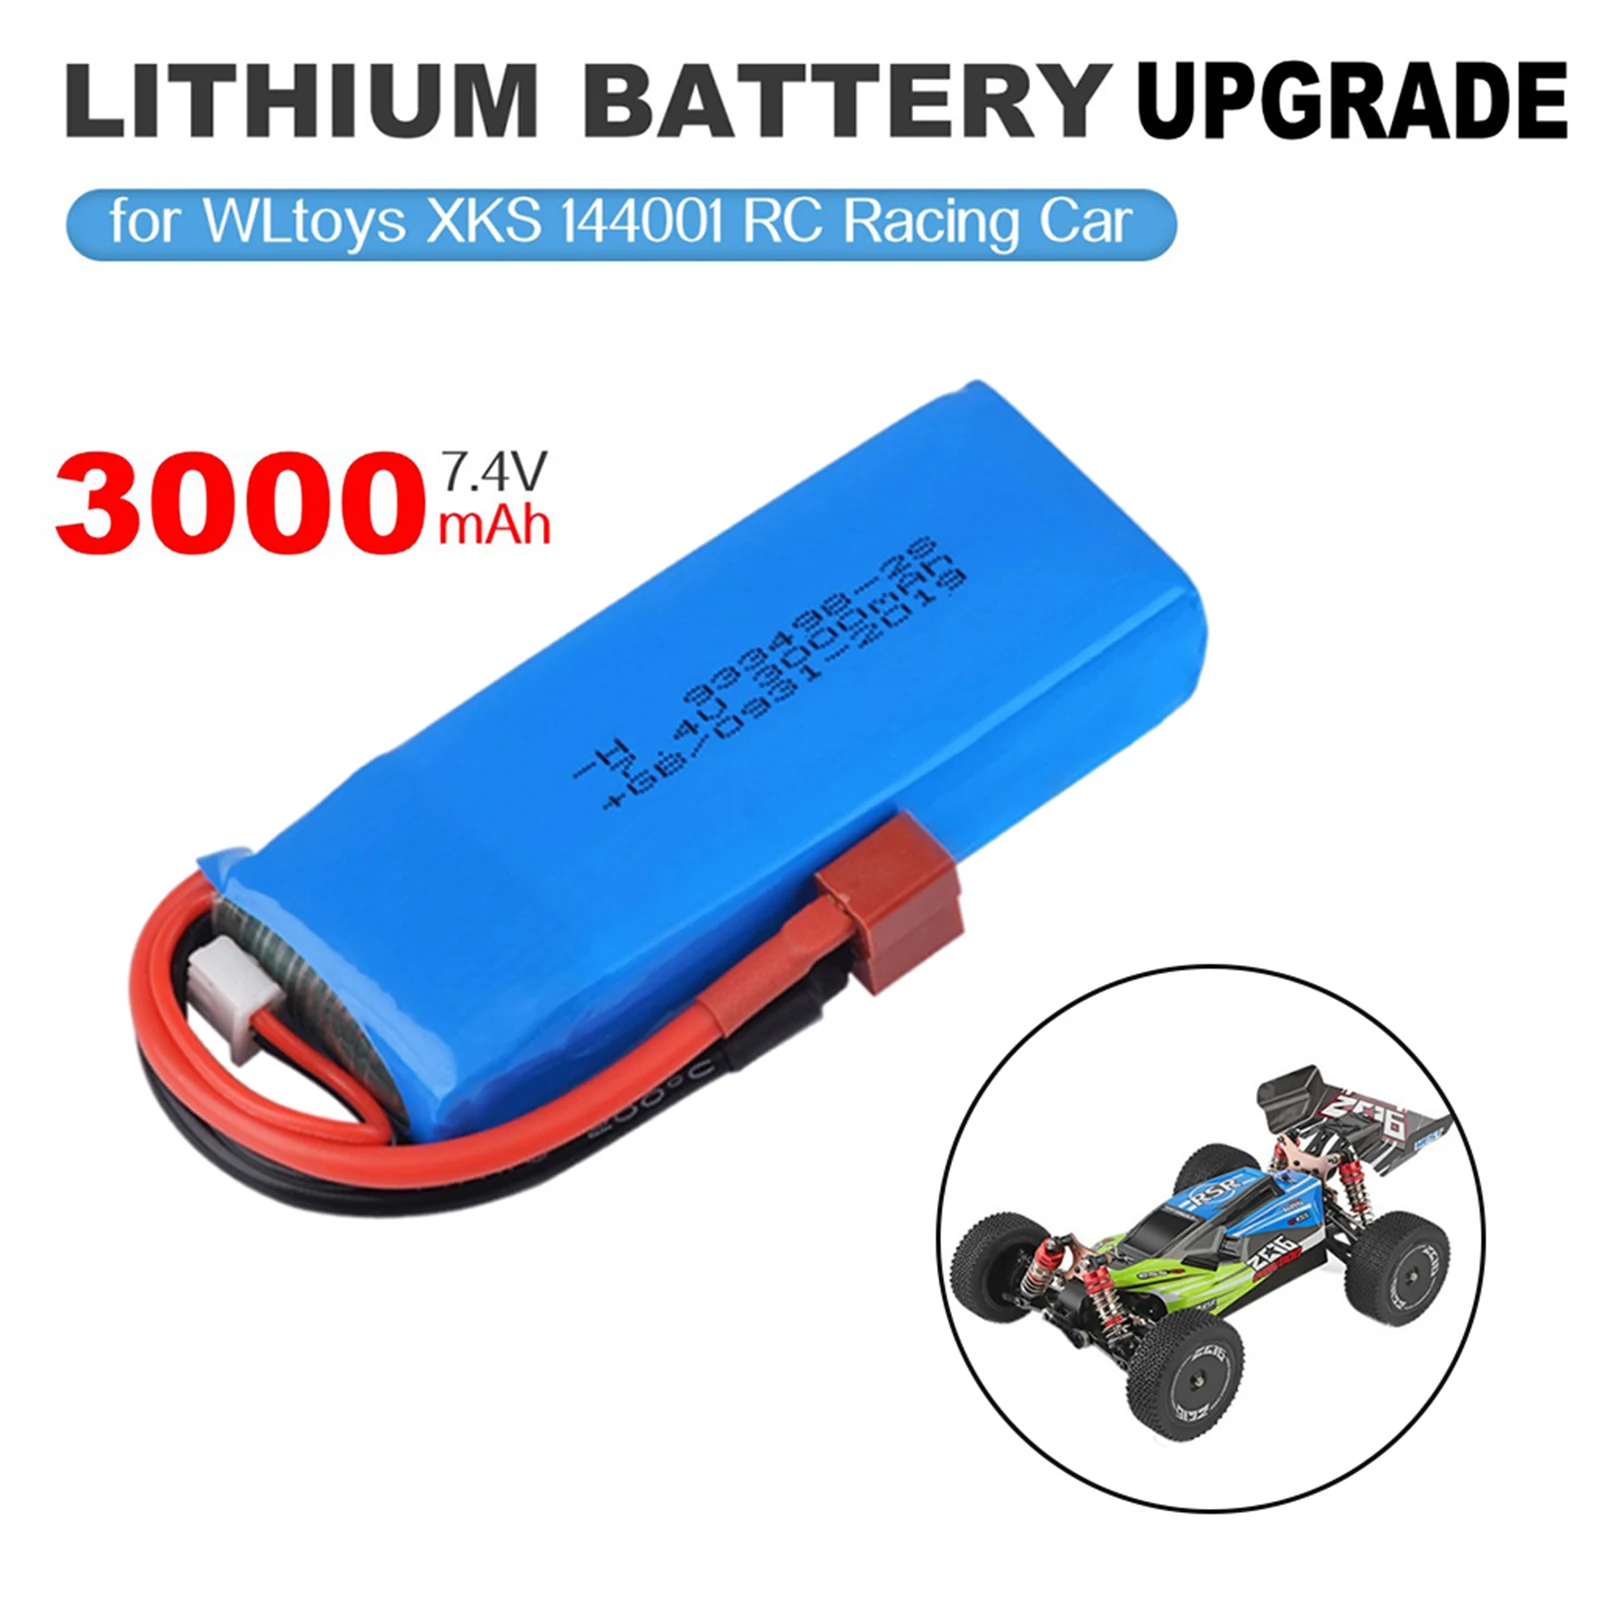 2S 7.4V 3000mAh Lithium Polymer Batteries for WLTOYS XKS 144001 1240181 124019 Remote Control RC Model Car Accessories